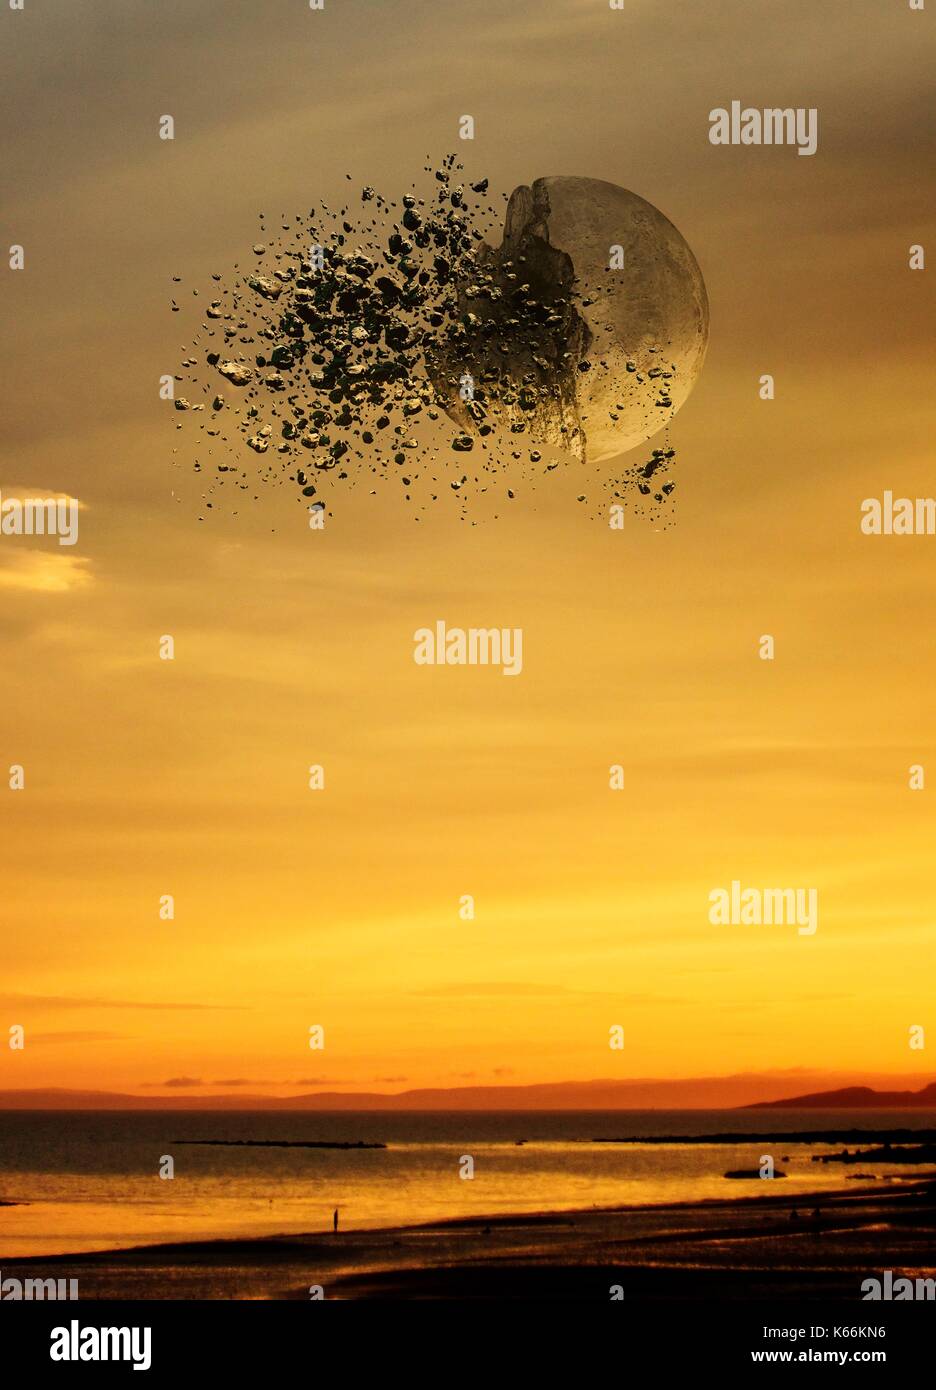 Illustration of the Moon after it has been hit by an asteroid. Stock Photo